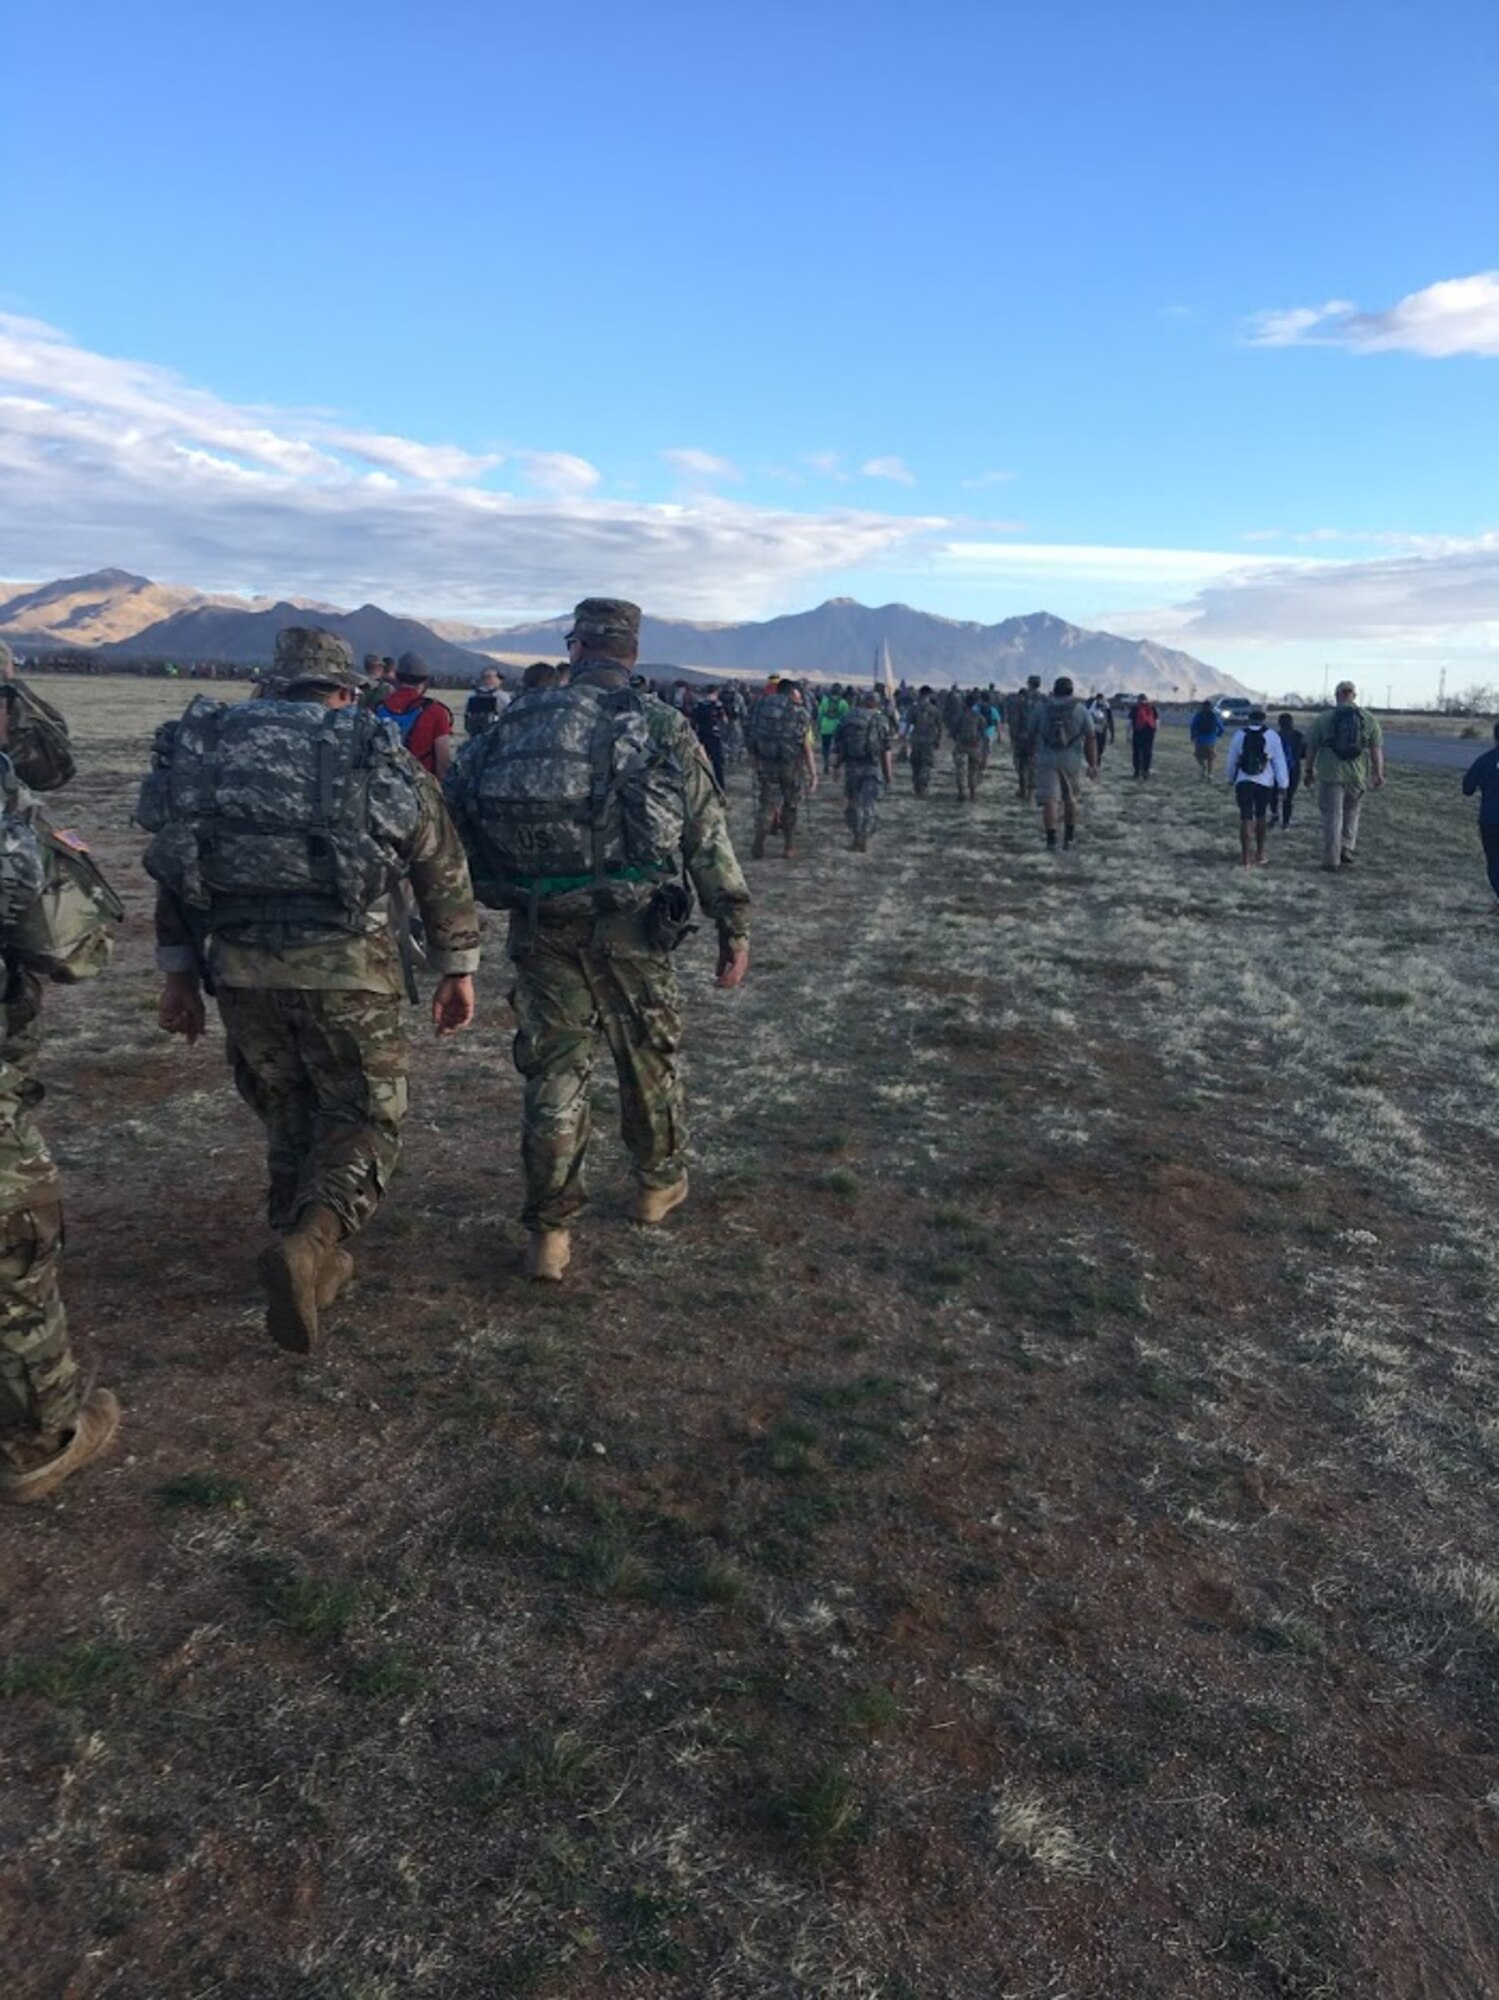 Participants of the 29th annual Bataan Memorial Death March, make their way through the 26.2 miles course, March 25, 2018, at White Sands, N.M.